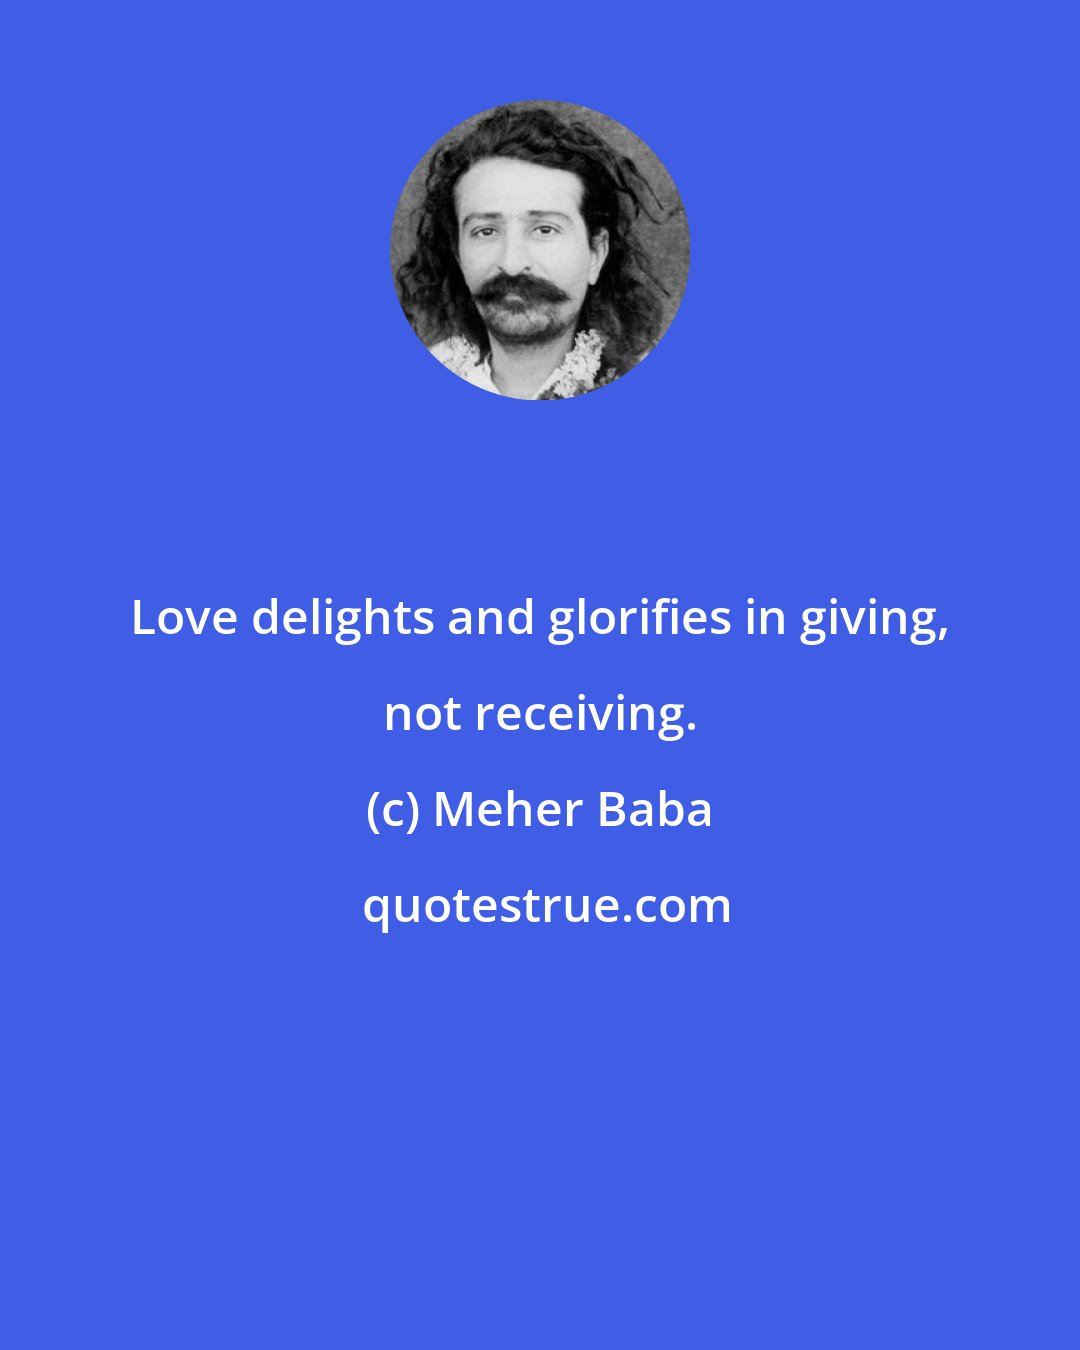 Meher Baba: Love delights and glorifies in giving, not receiving.